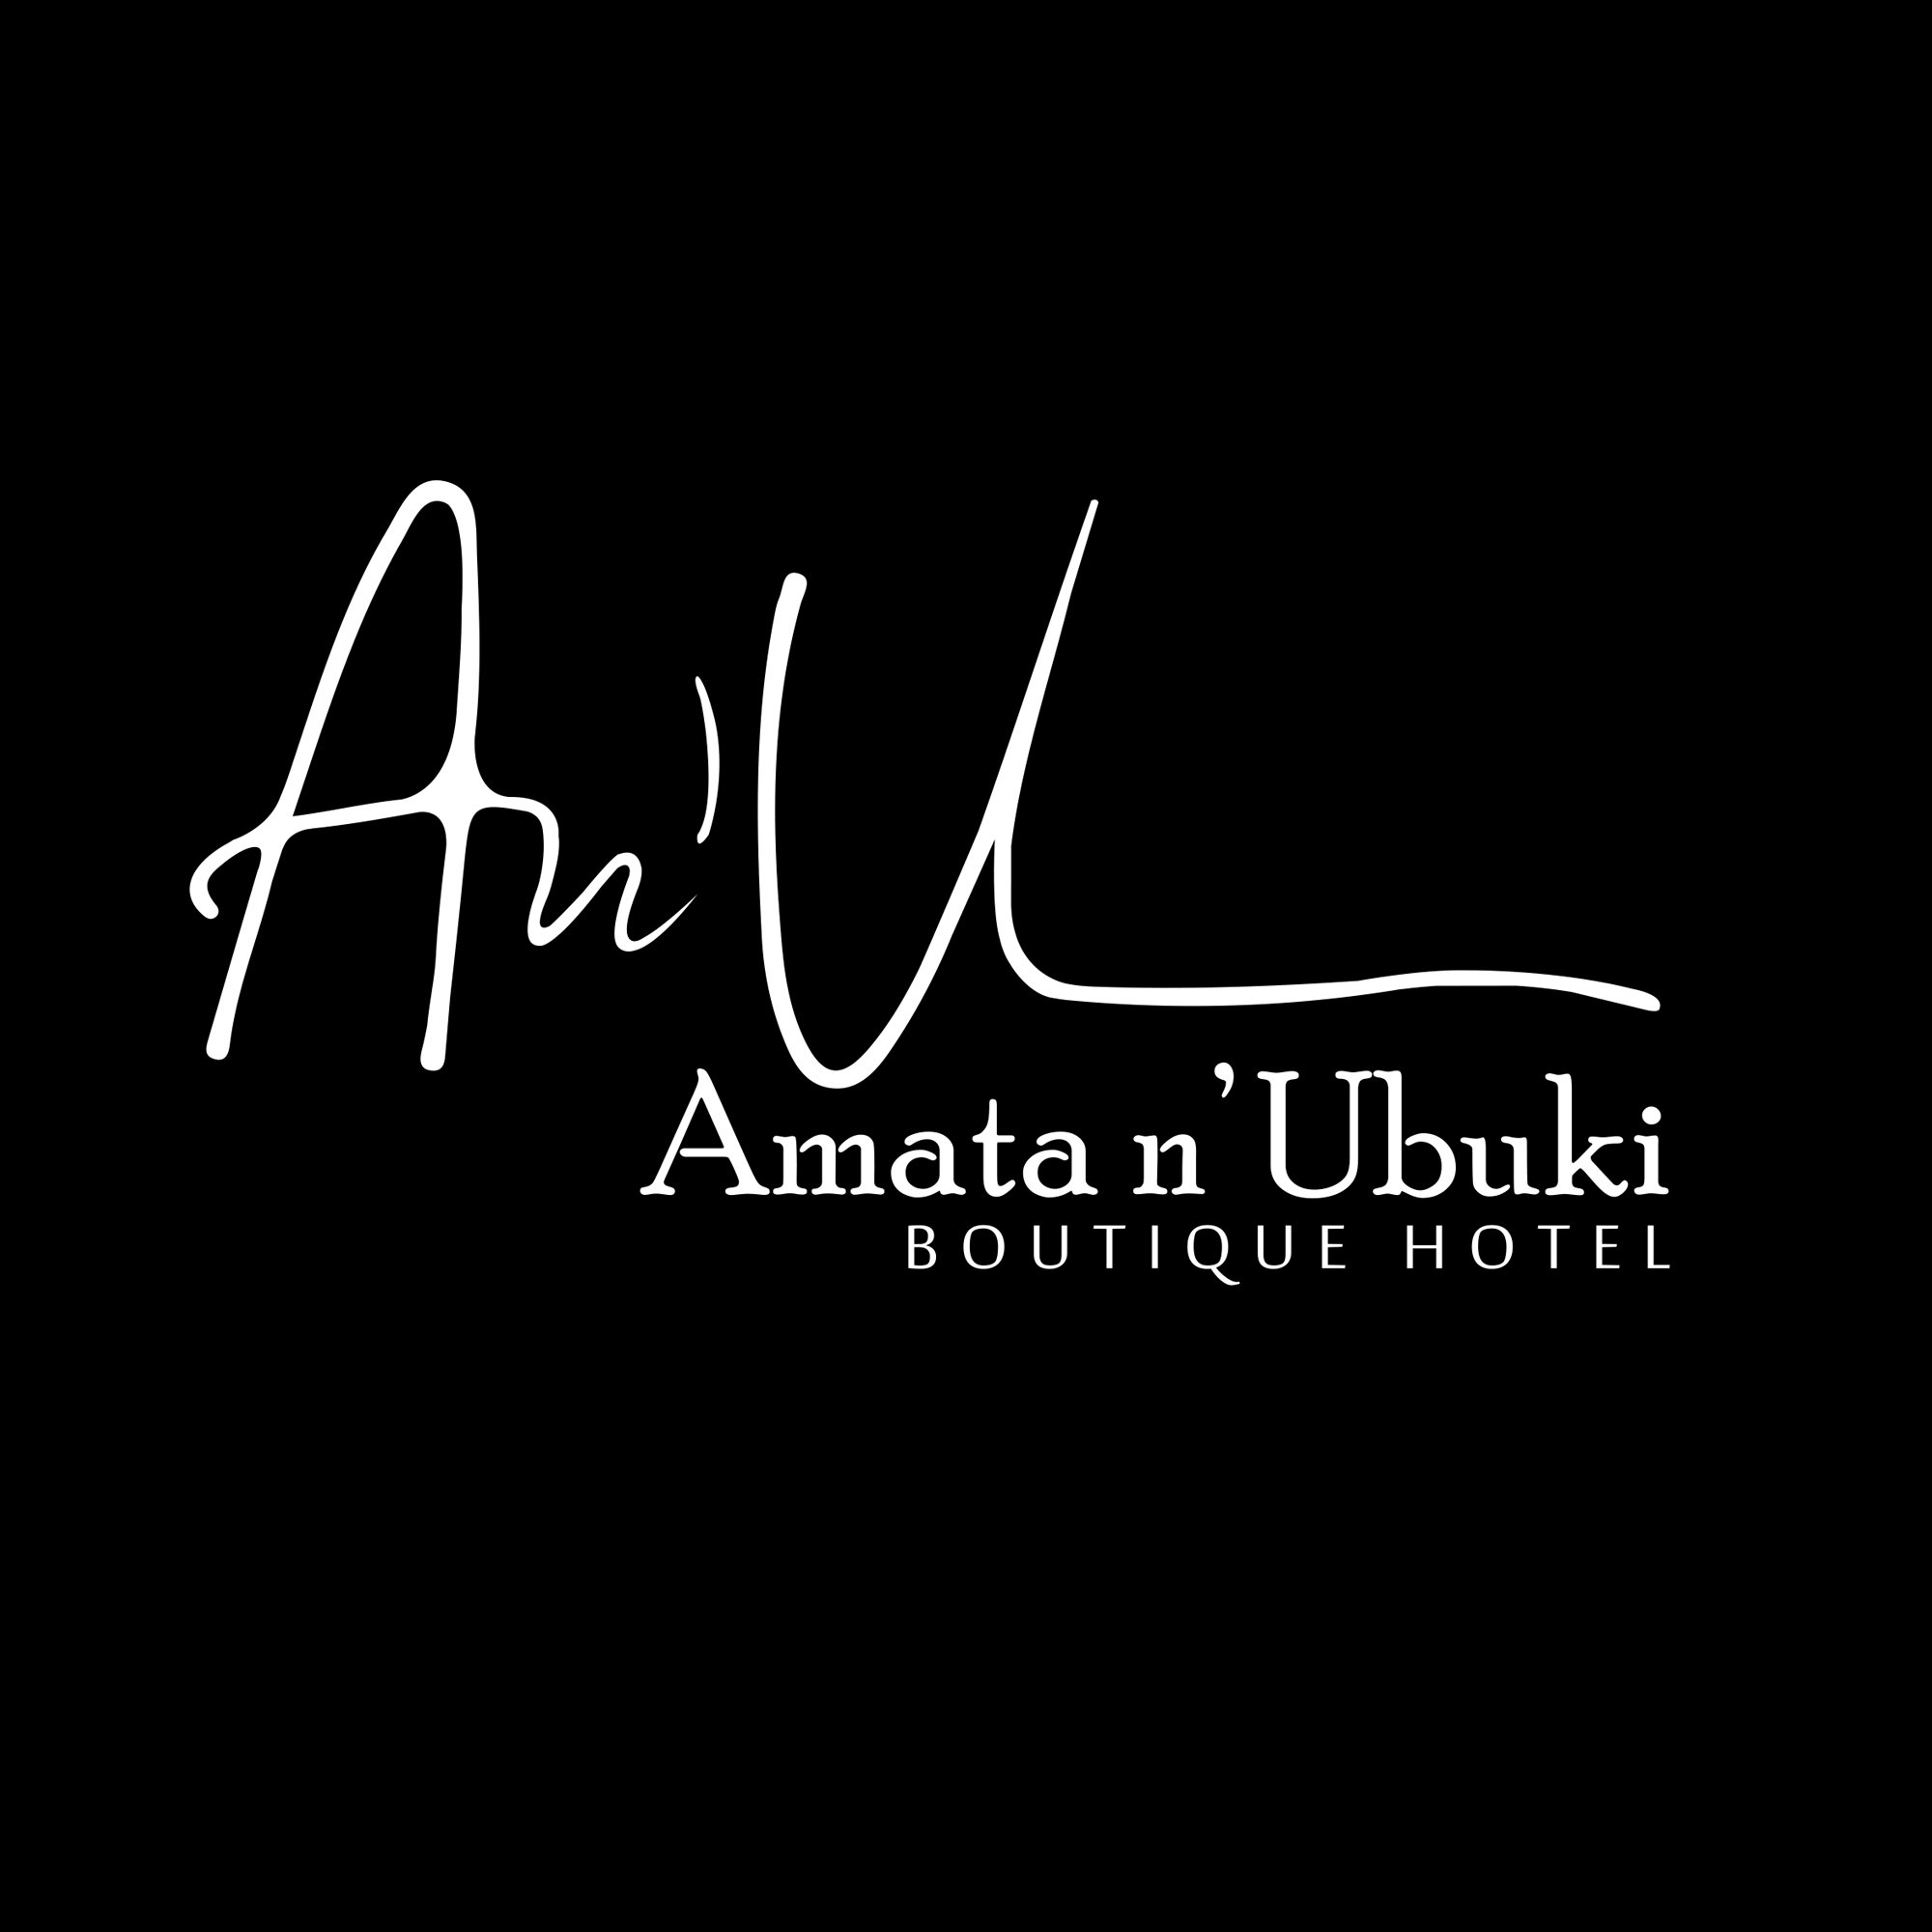 Amata n' Ubuki Boutique Hotel is a high end boutique hotel and restaurant. Ideal for a romantic weekend, a family vacation and business trips.